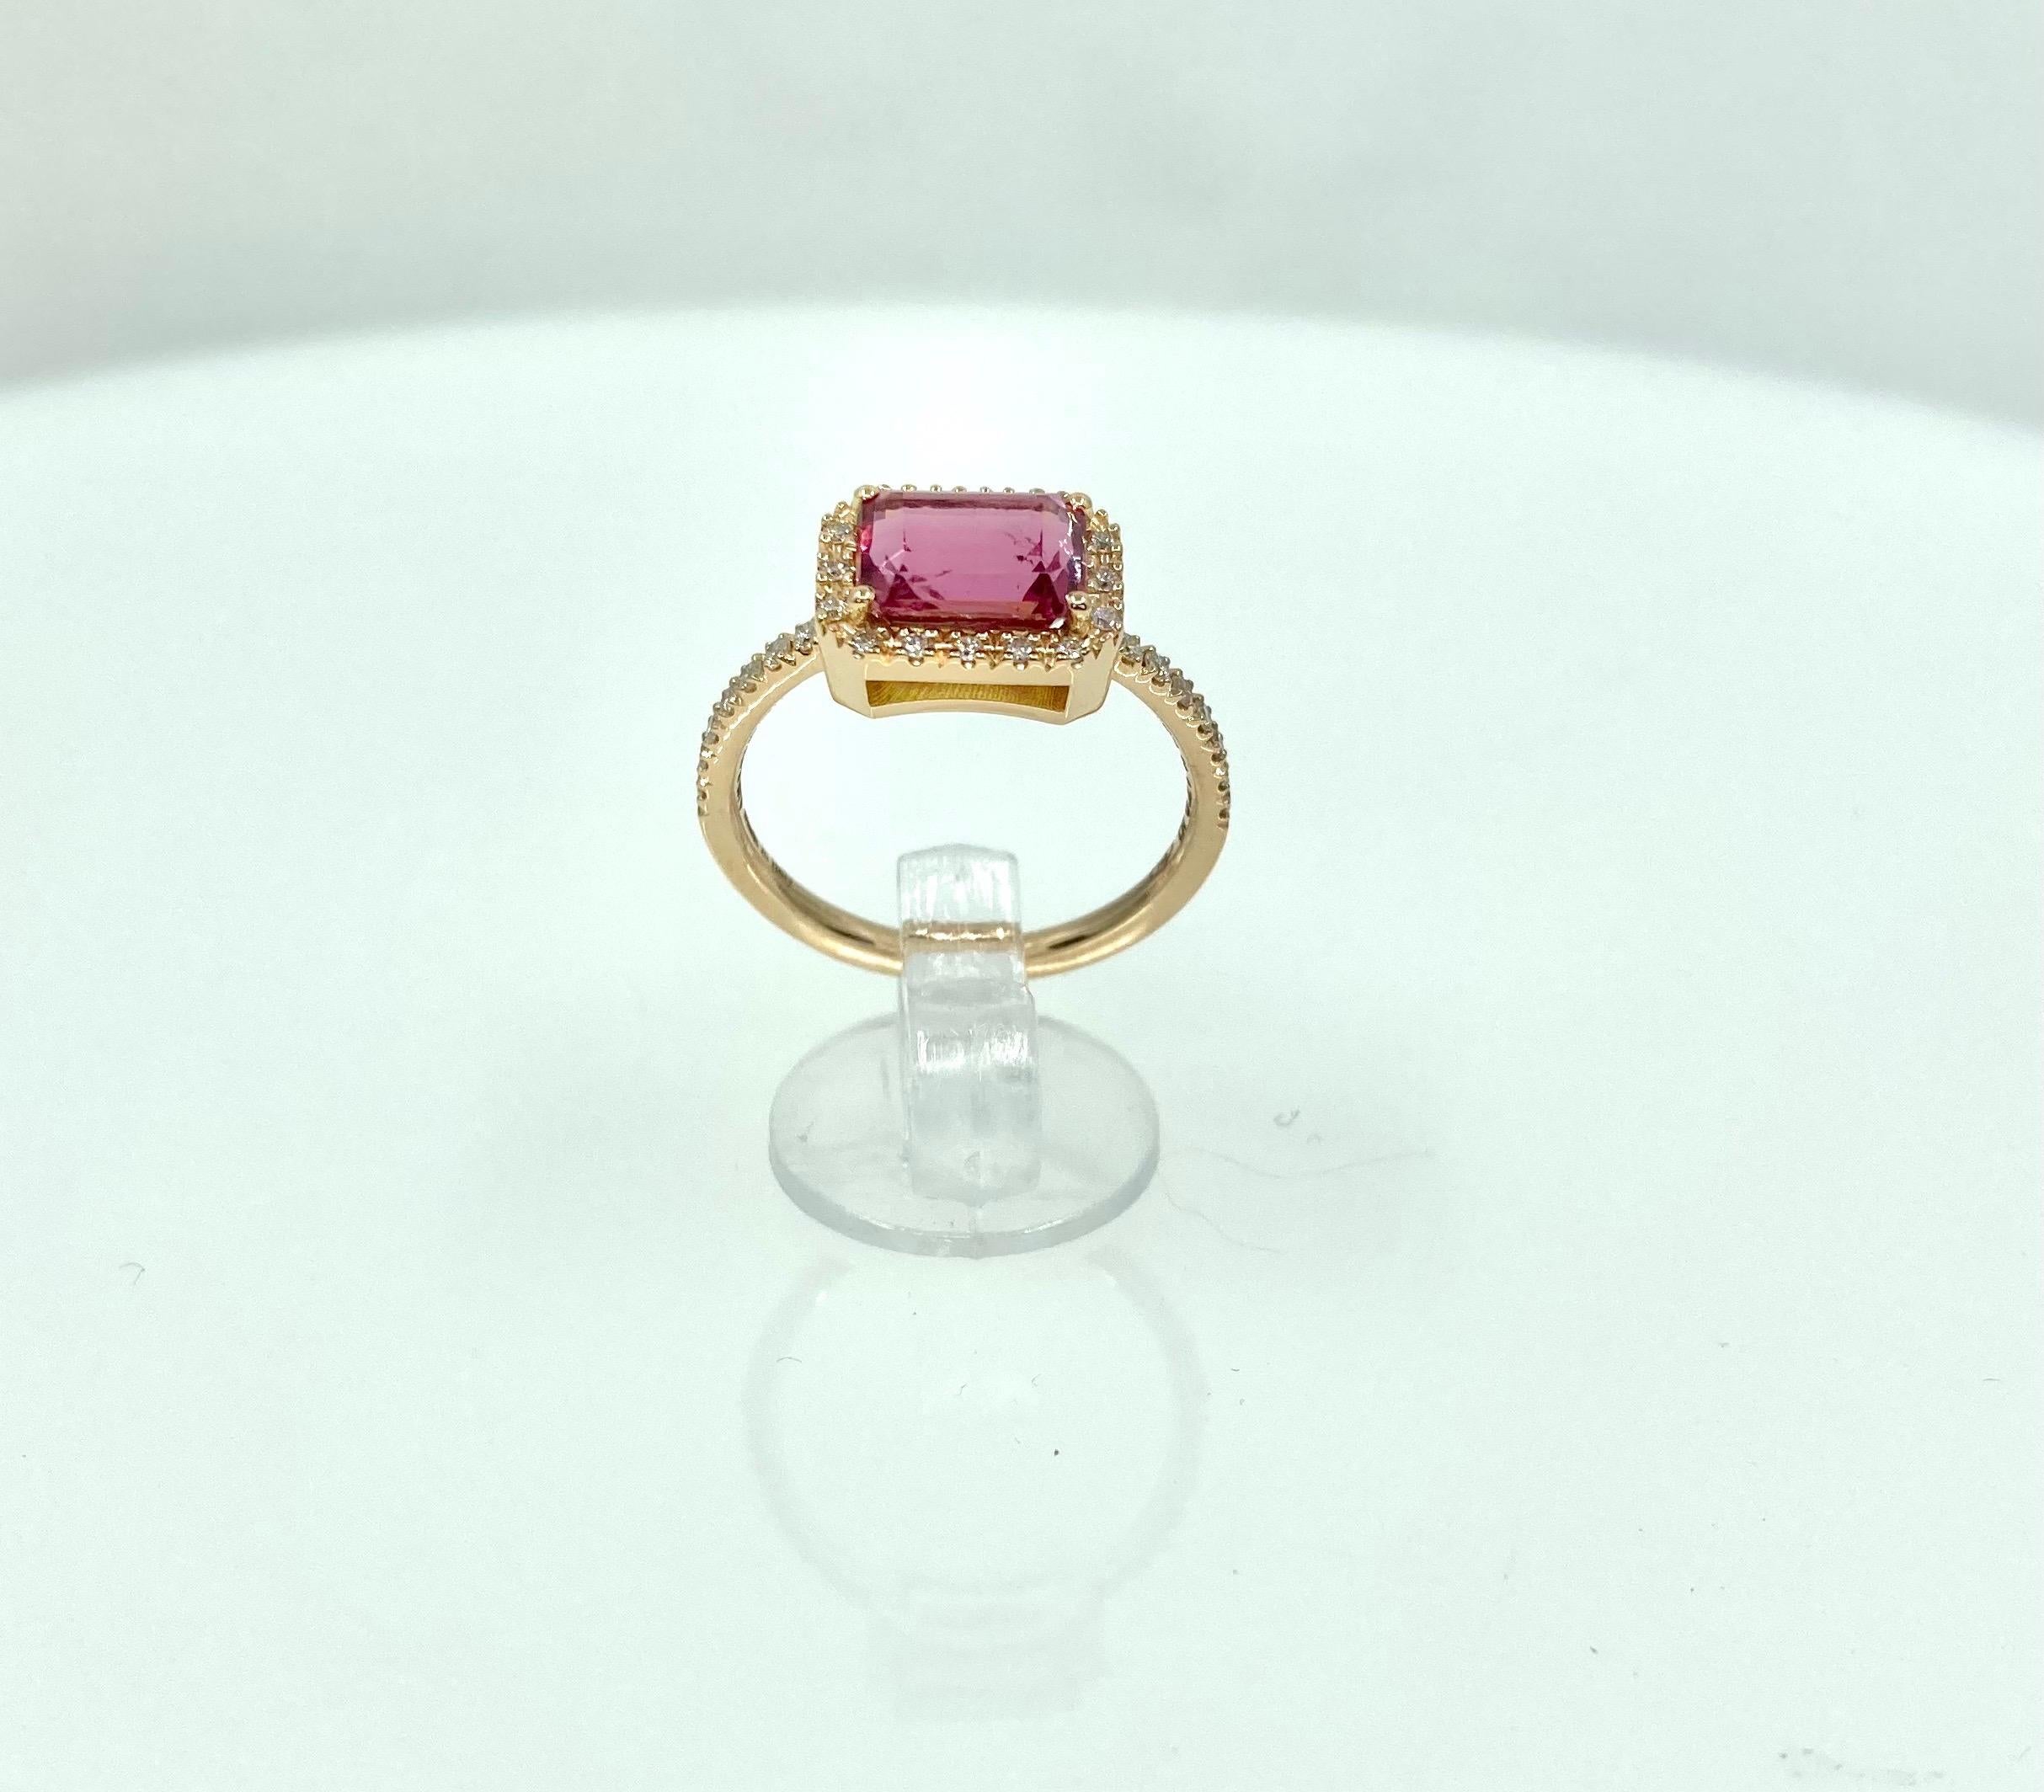 Timeless Rose Gold ring, with a central pink Tourmaline ct. 1.92 and Diamonds ct. 0.21, handmade in Italy by Roberto Casarin.

An elegant colourful ring, stylish and perfect on any attire. The warm color of the central Tourmaline and the rose gold